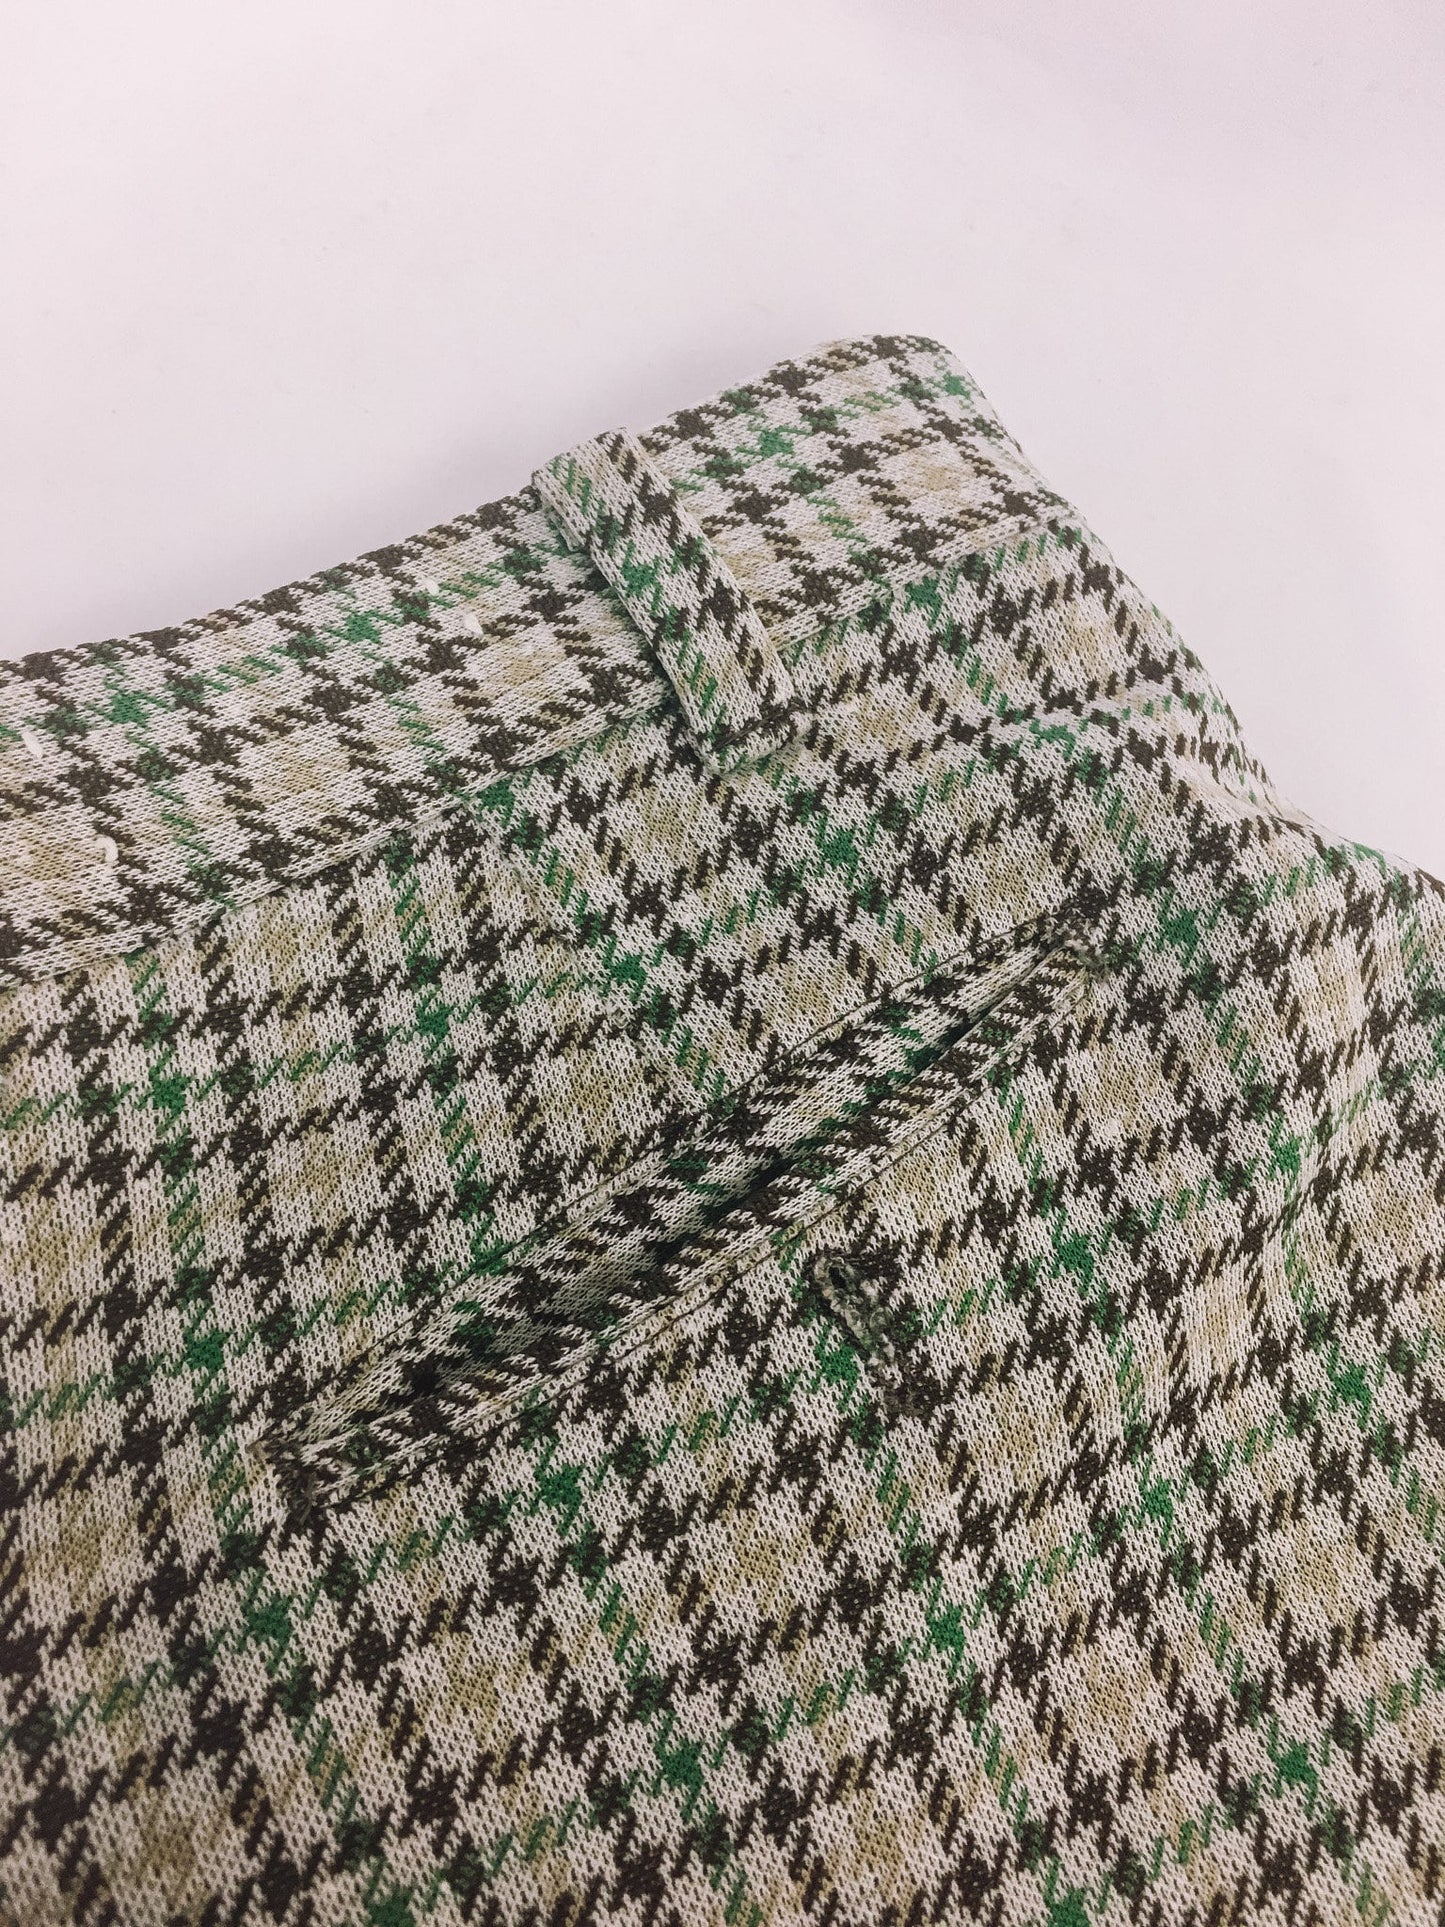 Vintage 1970s King's Road by Sears Green and Brown Plaid Trousers, Men's Sz. 34